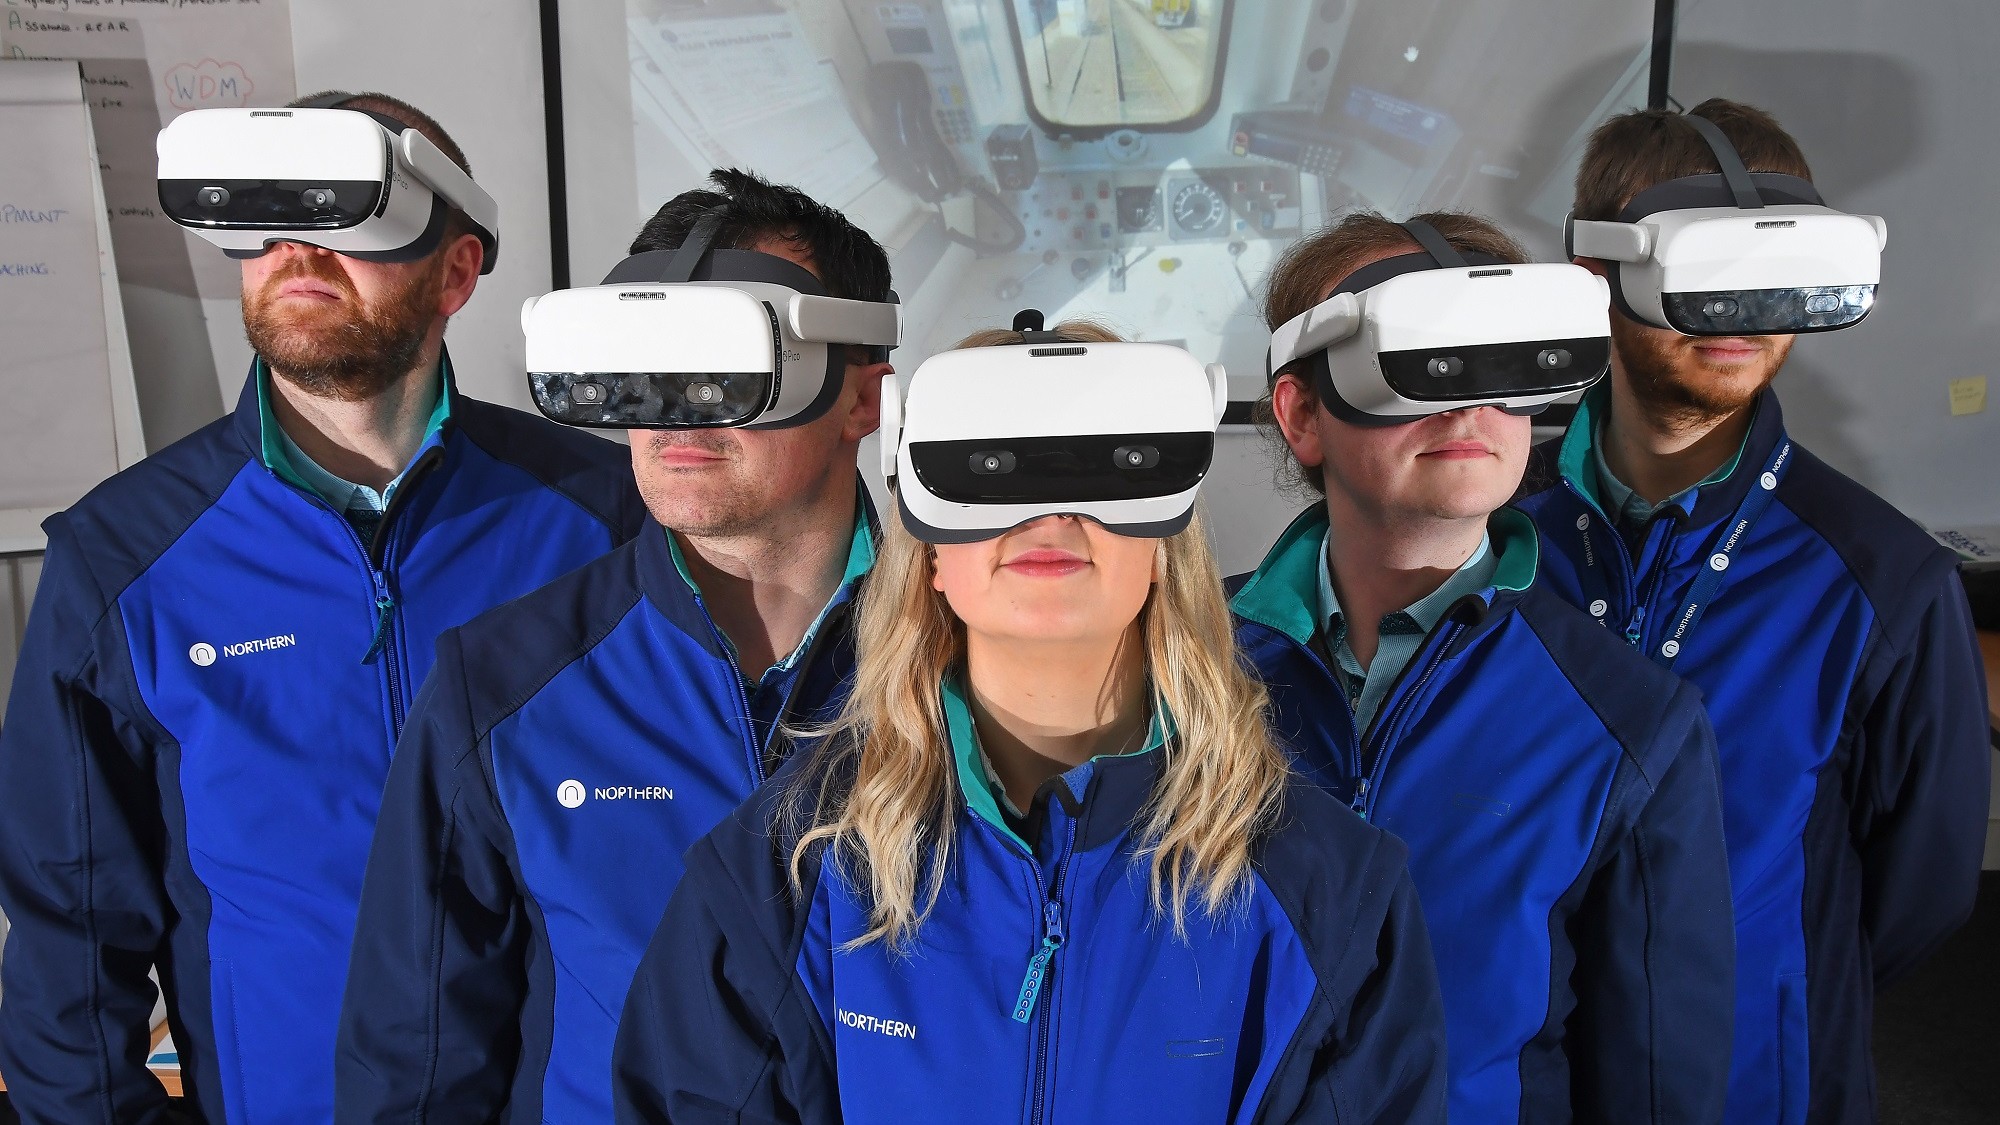 Image shows apprentices using VR technology at Northern training academy